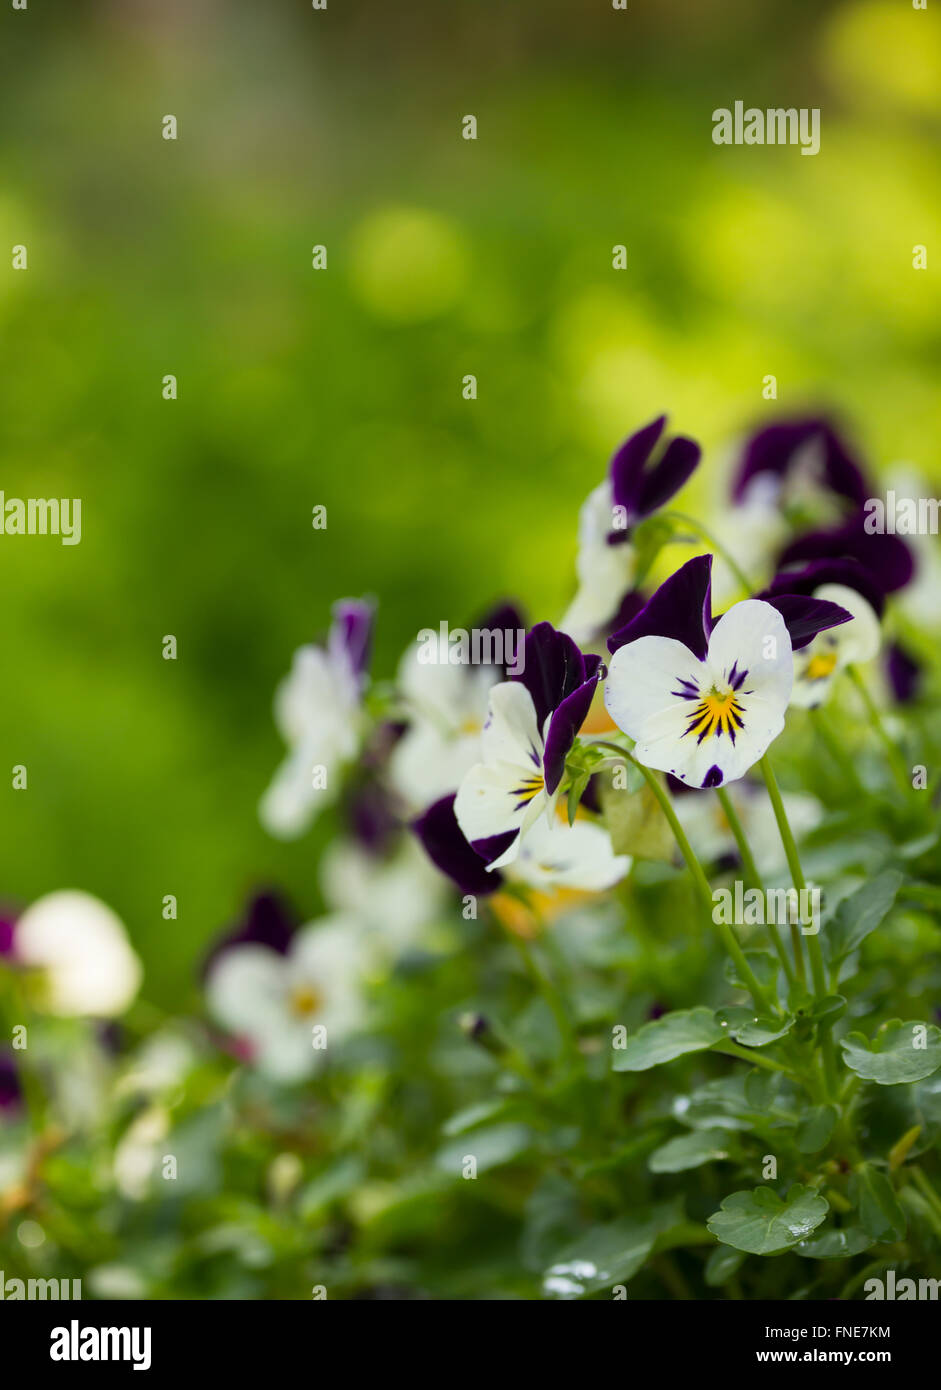 Flowers in the small garden, blur background Stock Photo - Alamy